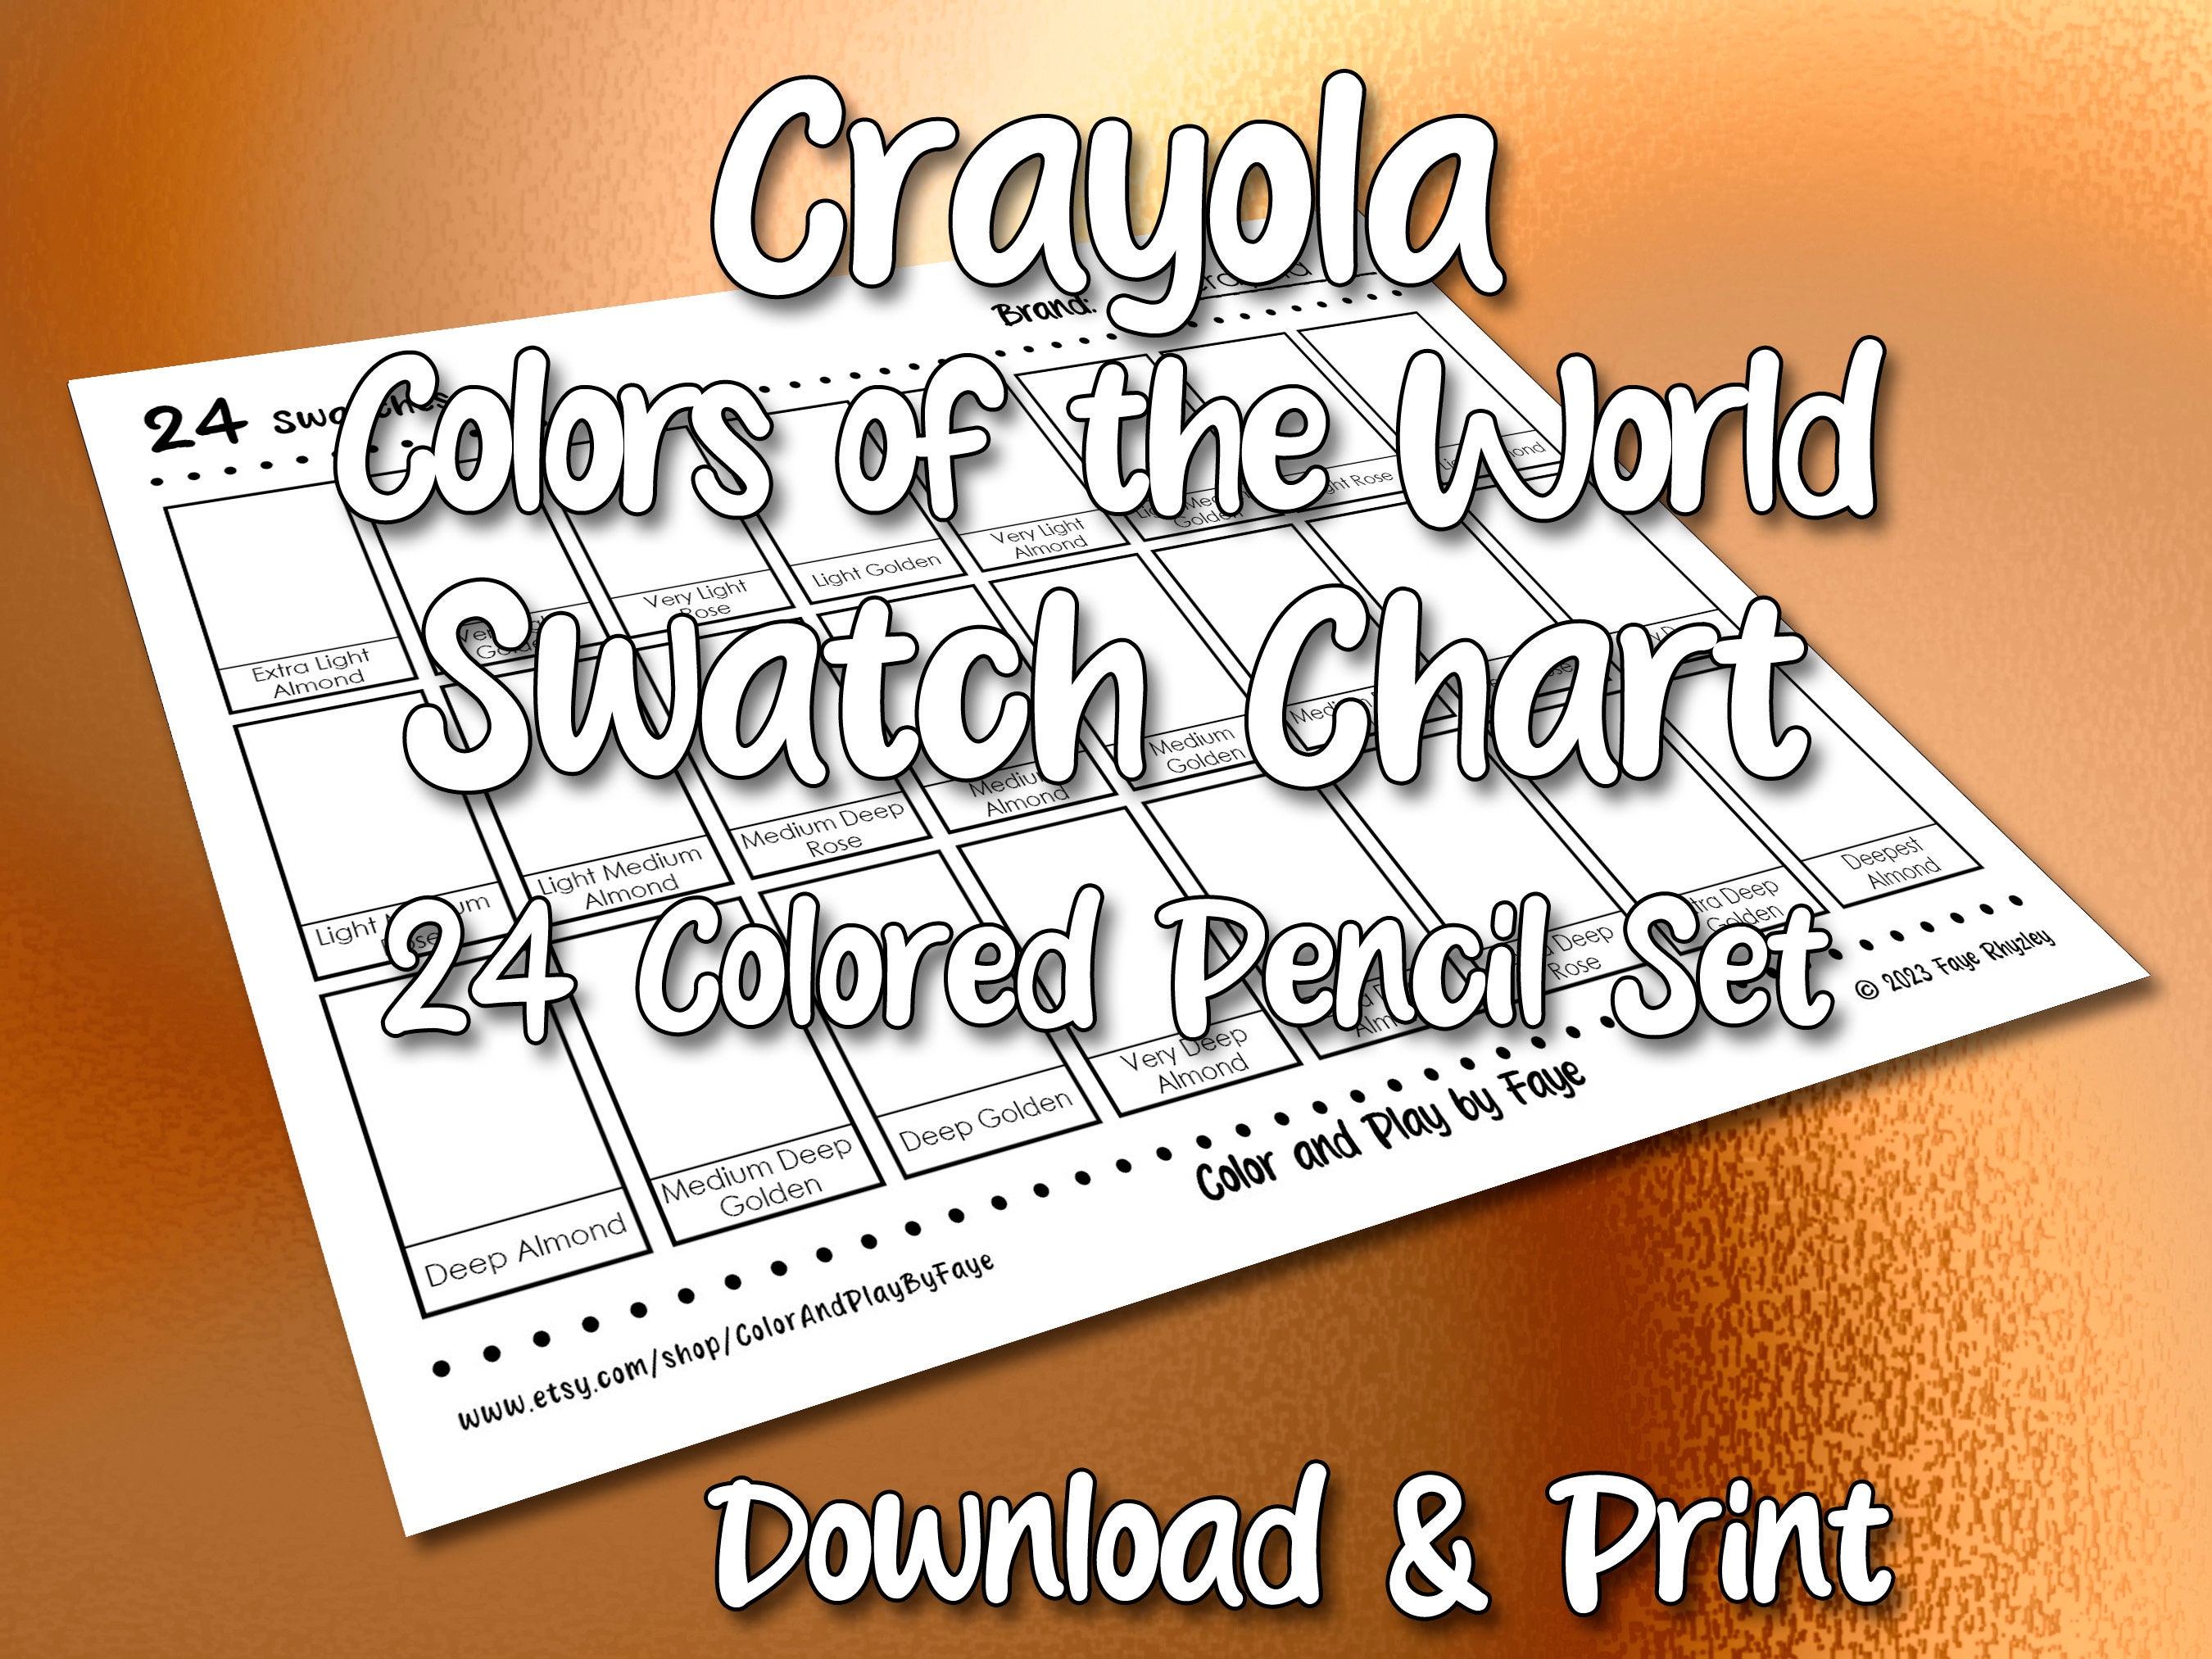 Crayola 24 Colors of the World Swatch Chart Page for Colored